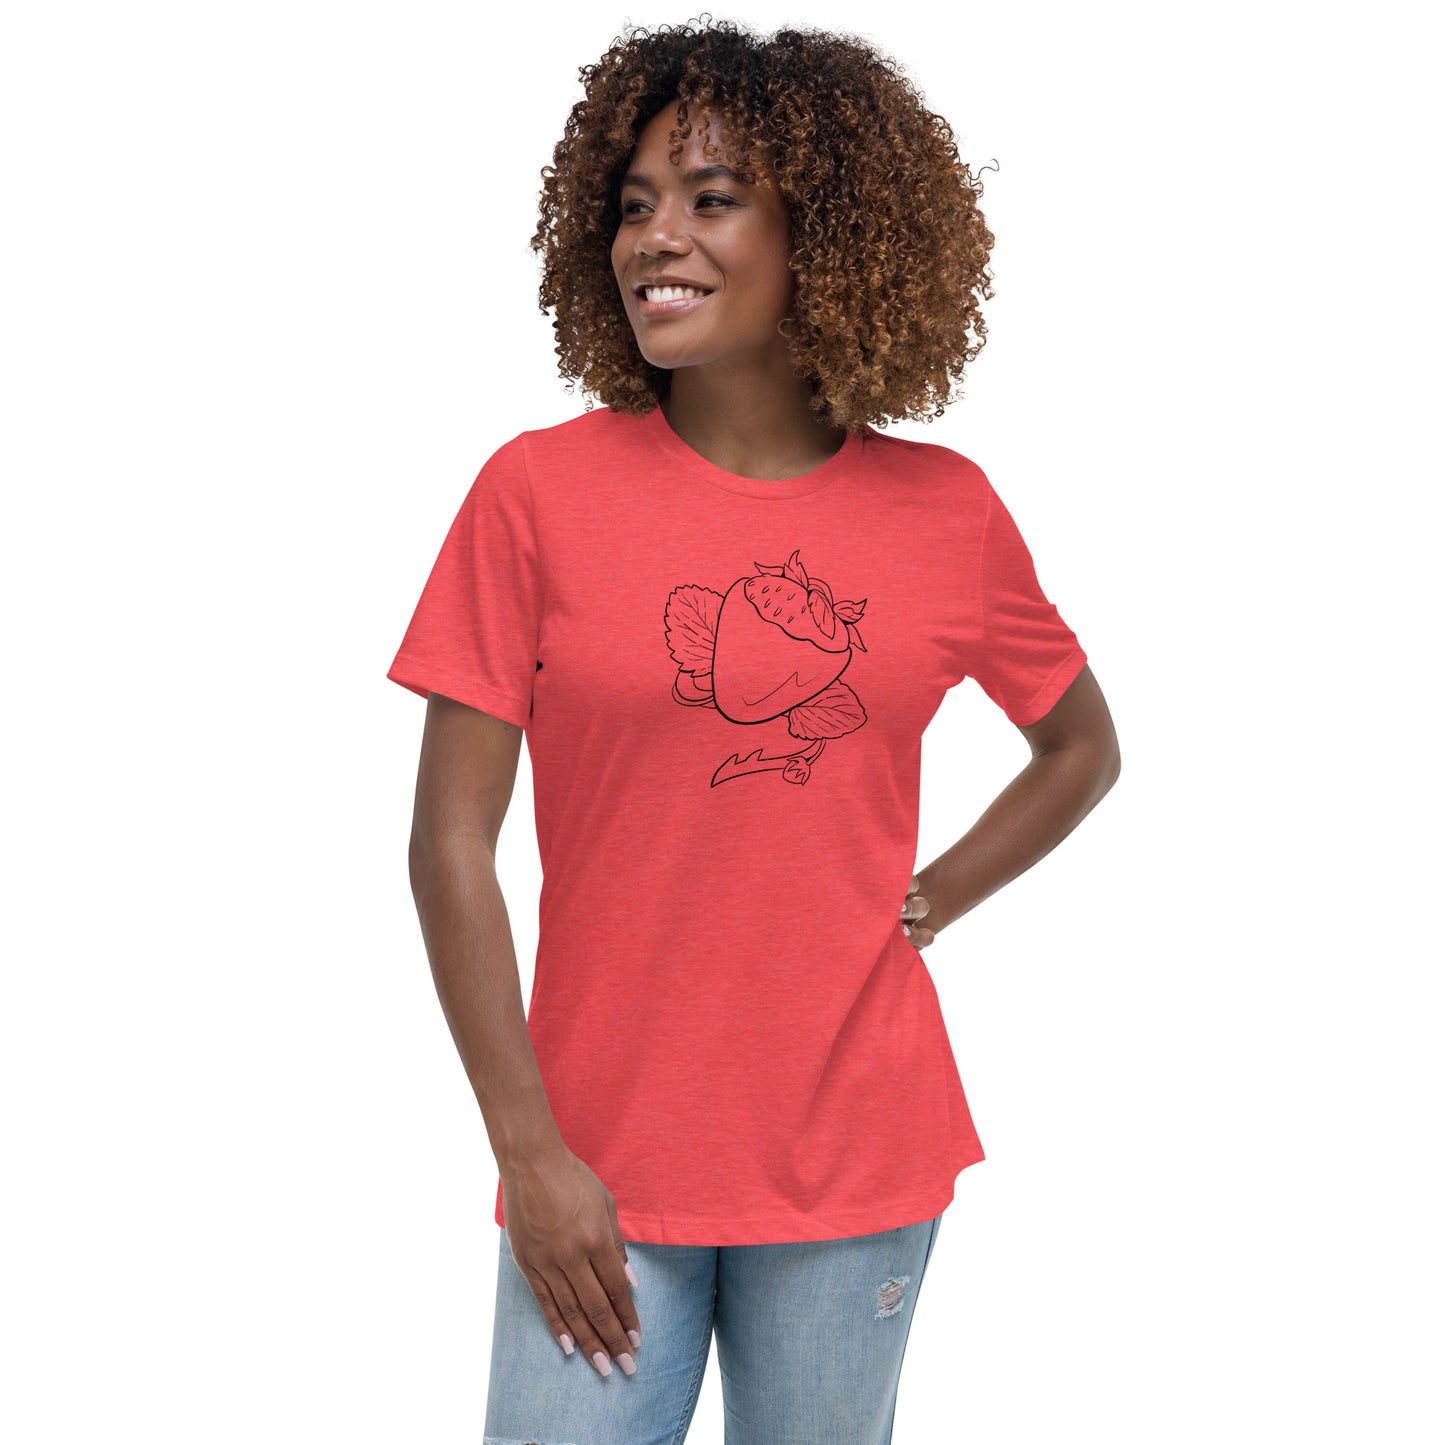 "Demon Strawberry" Women's Relaxed T-Shirt (The Guild Codex)